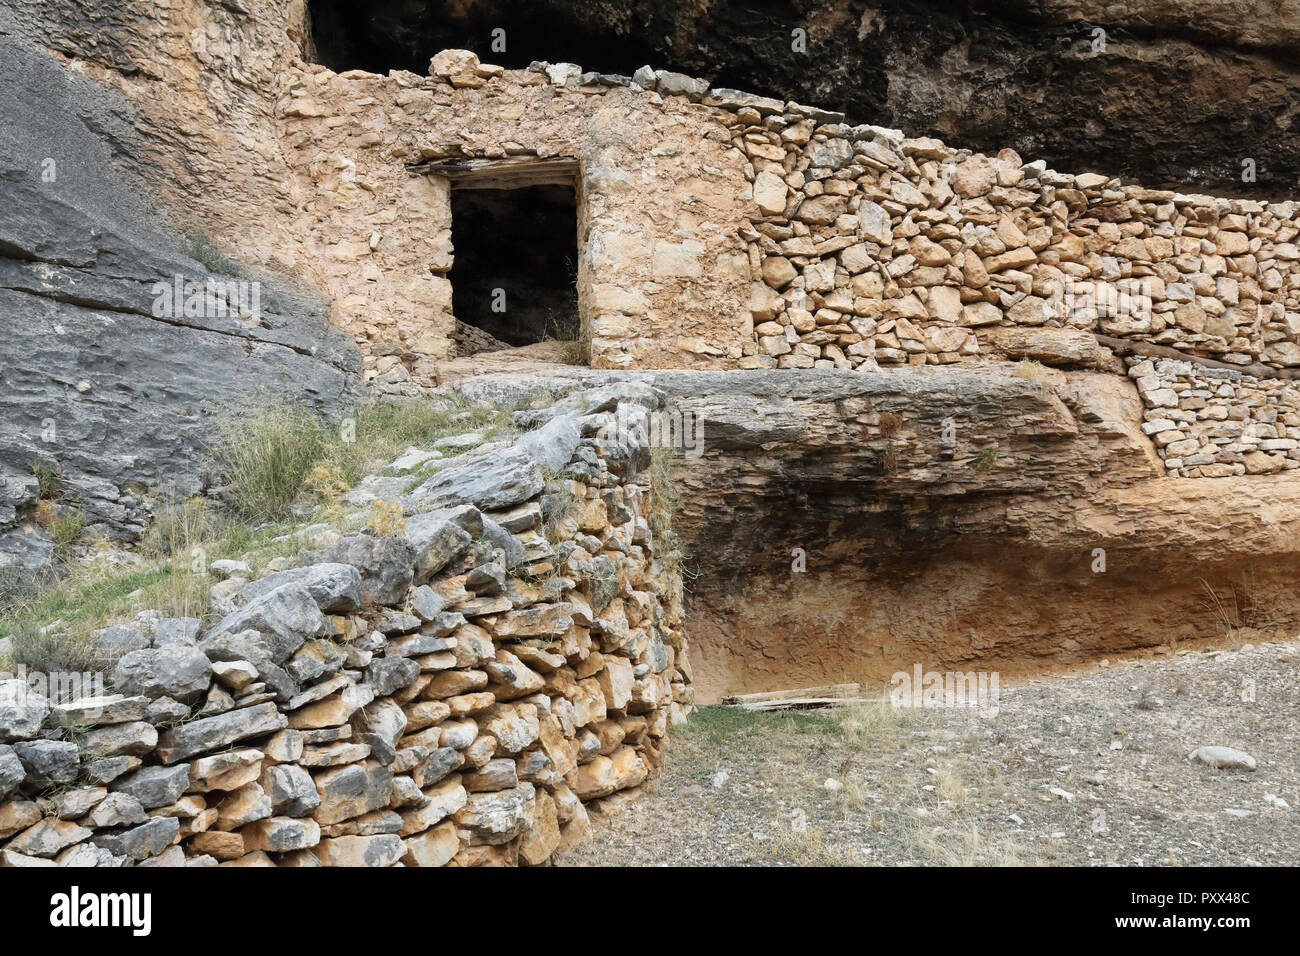 A shelter for shepherds and livestock made of stone drywall inside a cave in the red ferrous rock of the Barranco de la Hoz Seca canyon, Jaraba, Spain Stock Photo